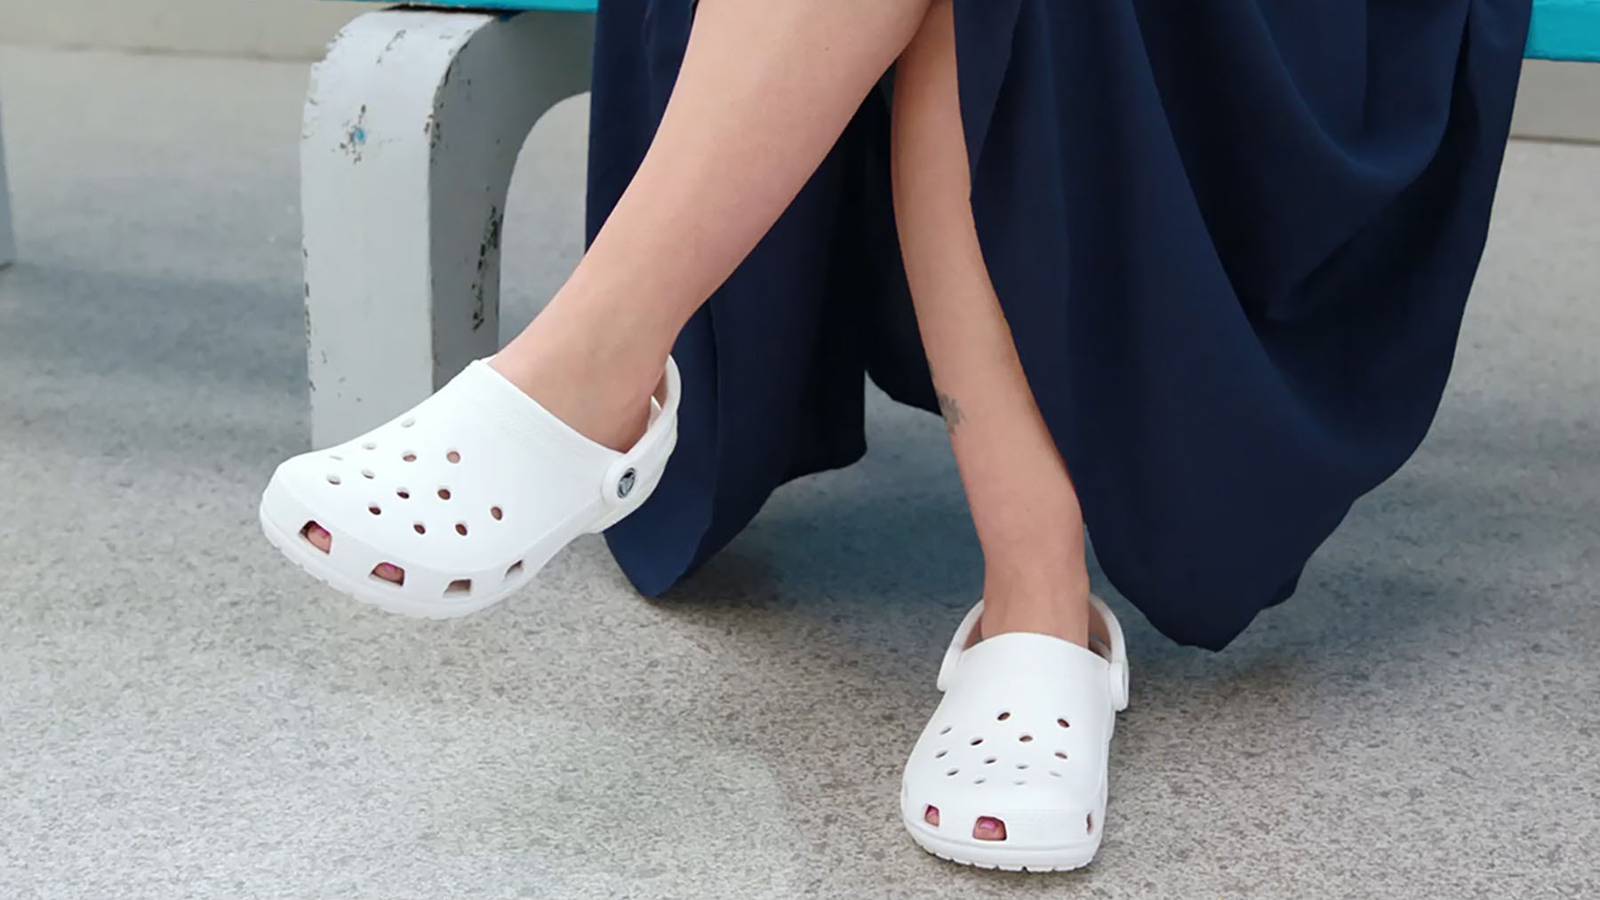 Fake Crocs Are Being Fought by the Maker of the Real Comfy Clogs | BoF